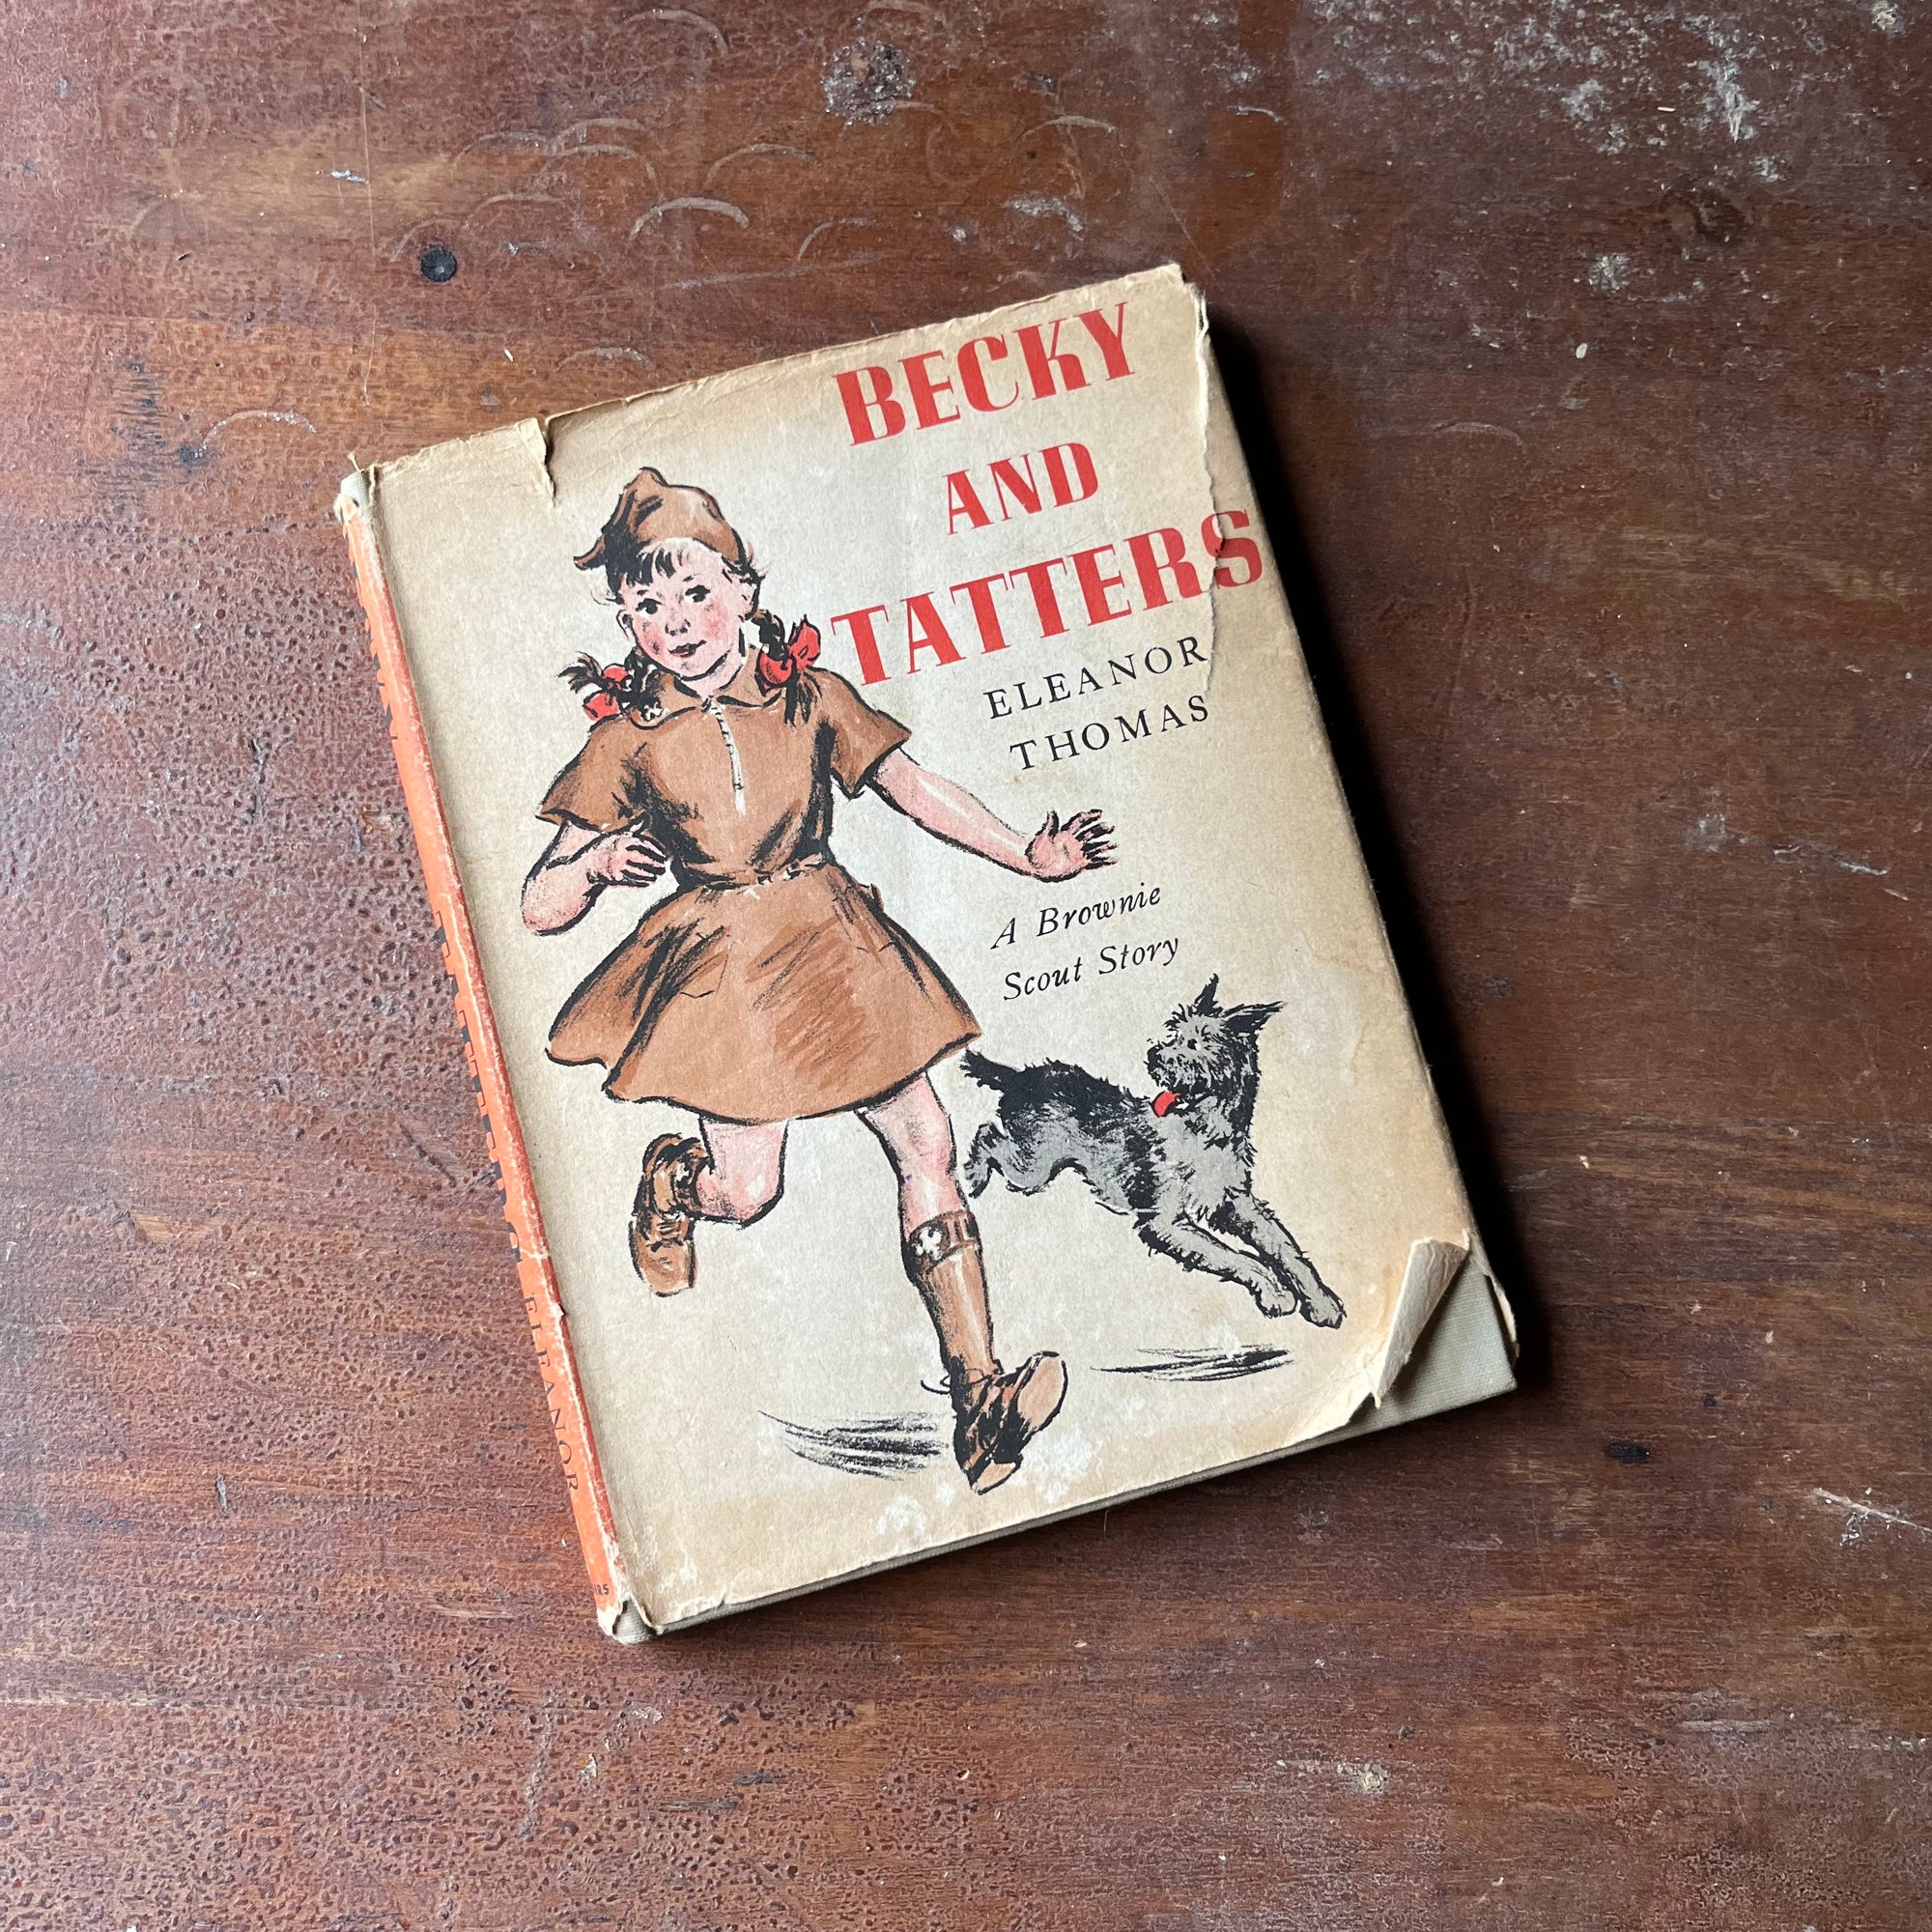 Log Cabin Vintage - vintage children's book, a brownie scout story, vintage chapter book - Beck and Tatters:  A brownie Scout Story written by Eleanor Thomas with illustrations by Gertrude Howe - view of the dust jacket's front cover with an illustration of Beck & Tatters running on it